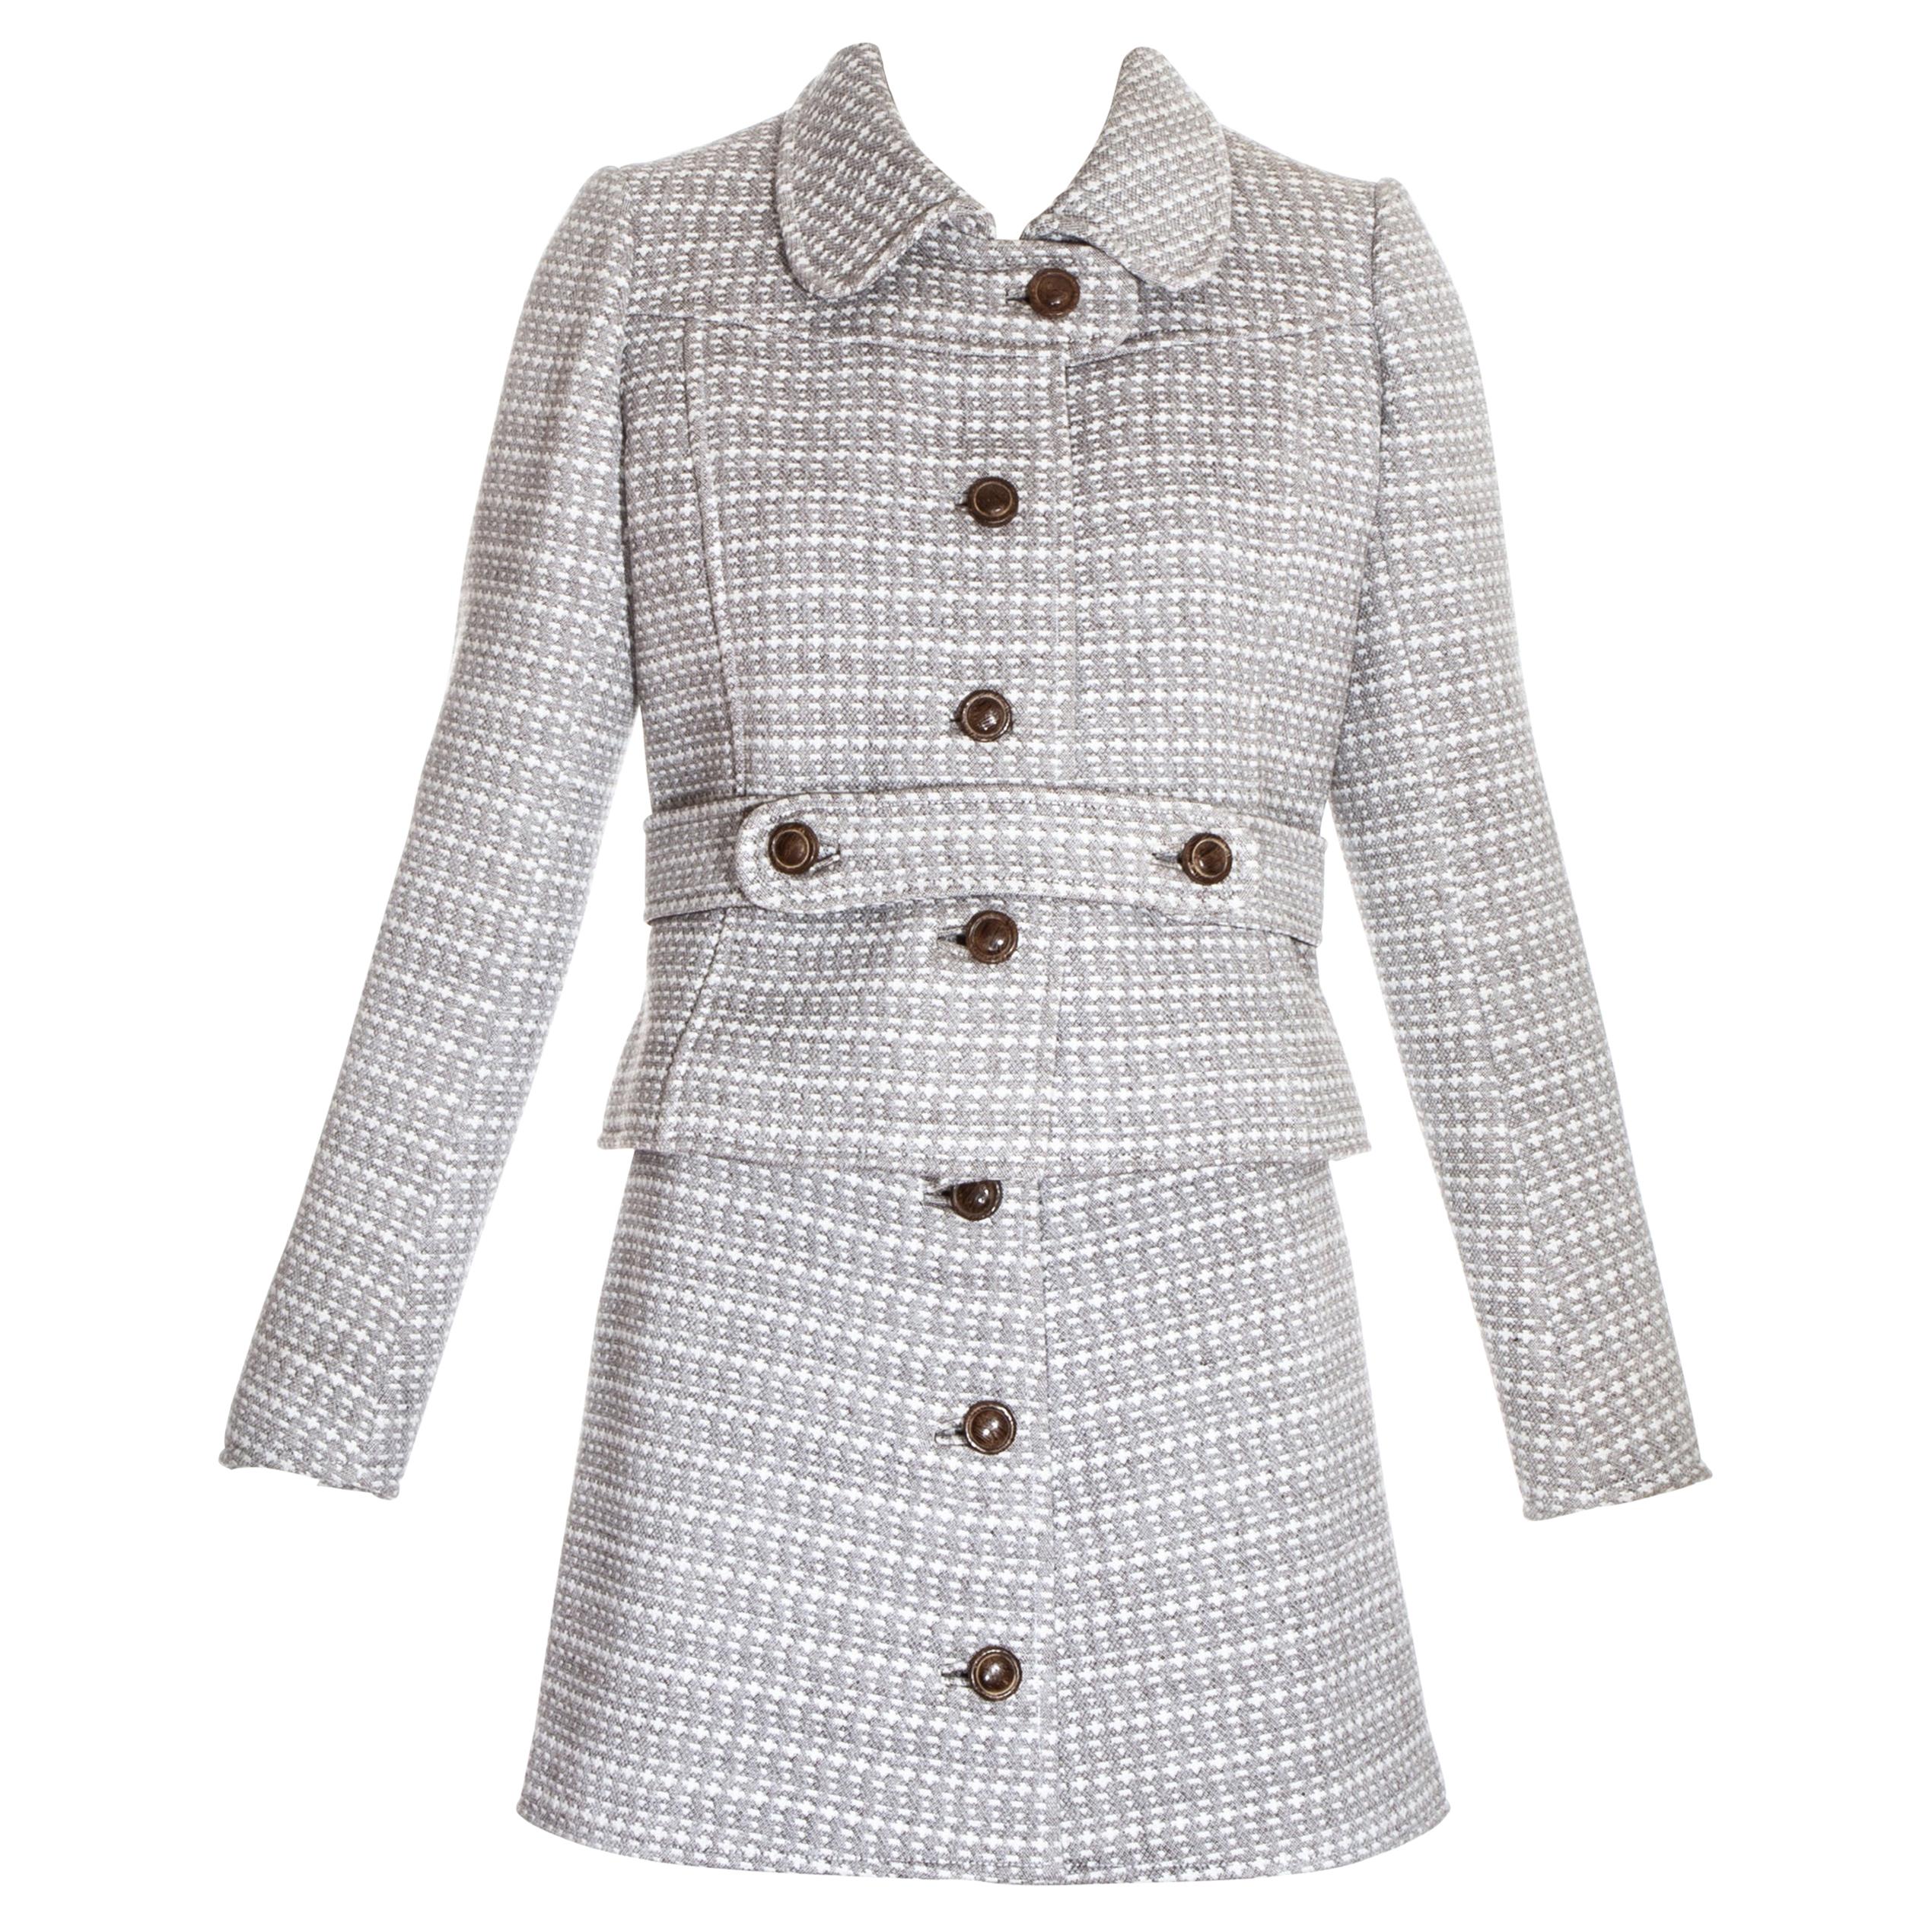 Courreges couture brown wool mini skirt suit, c. 1969 For Sale